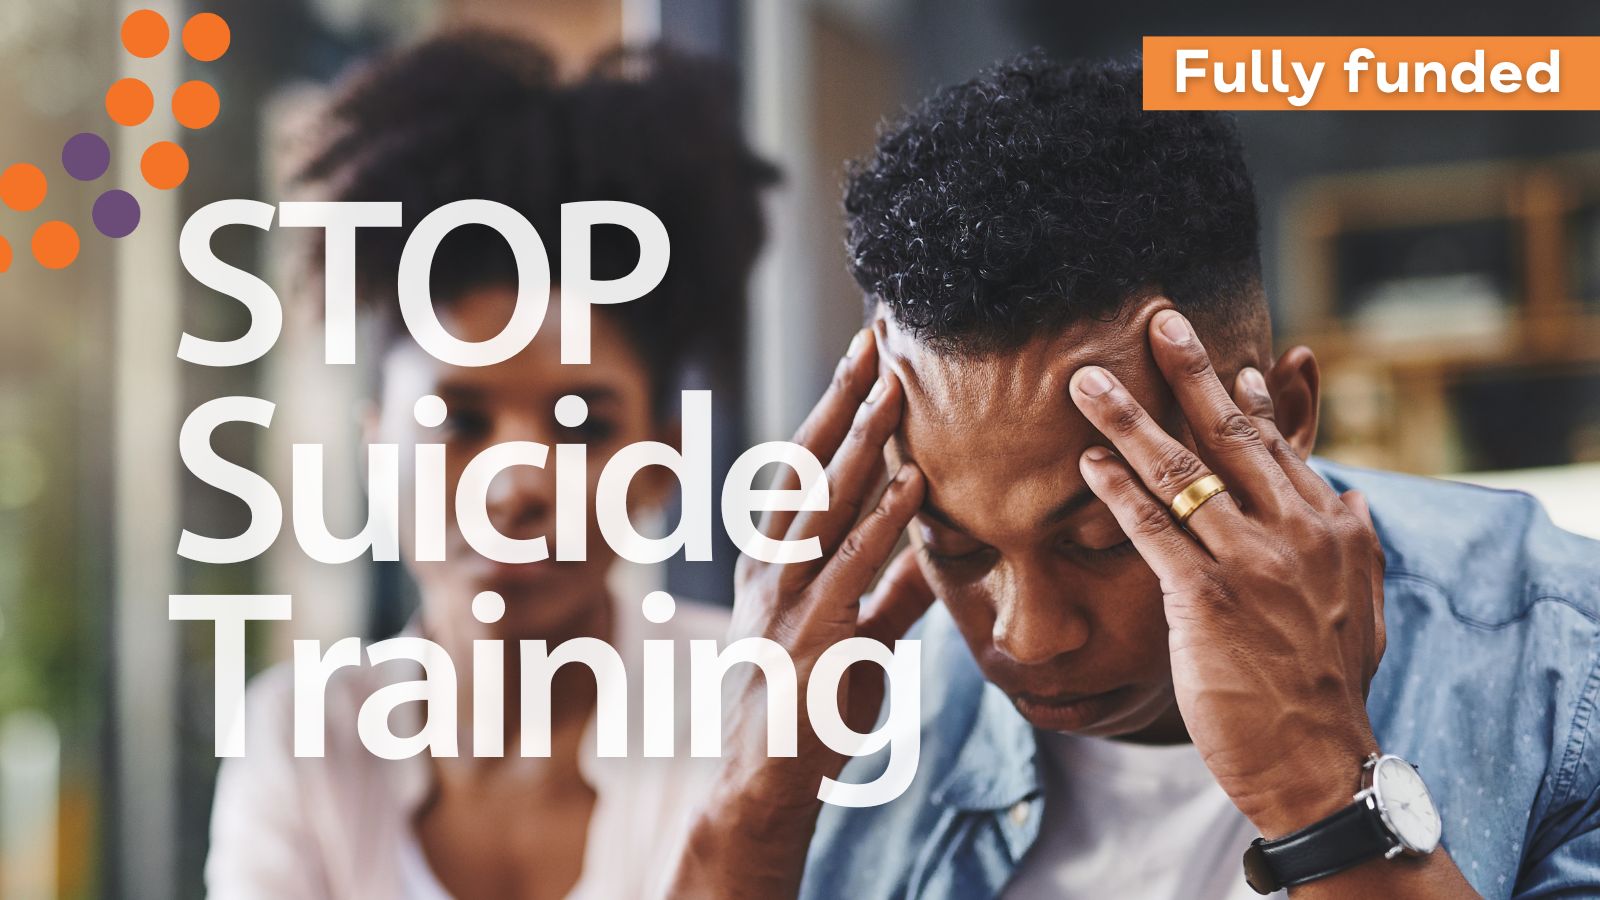 STOP Suicide prevention training